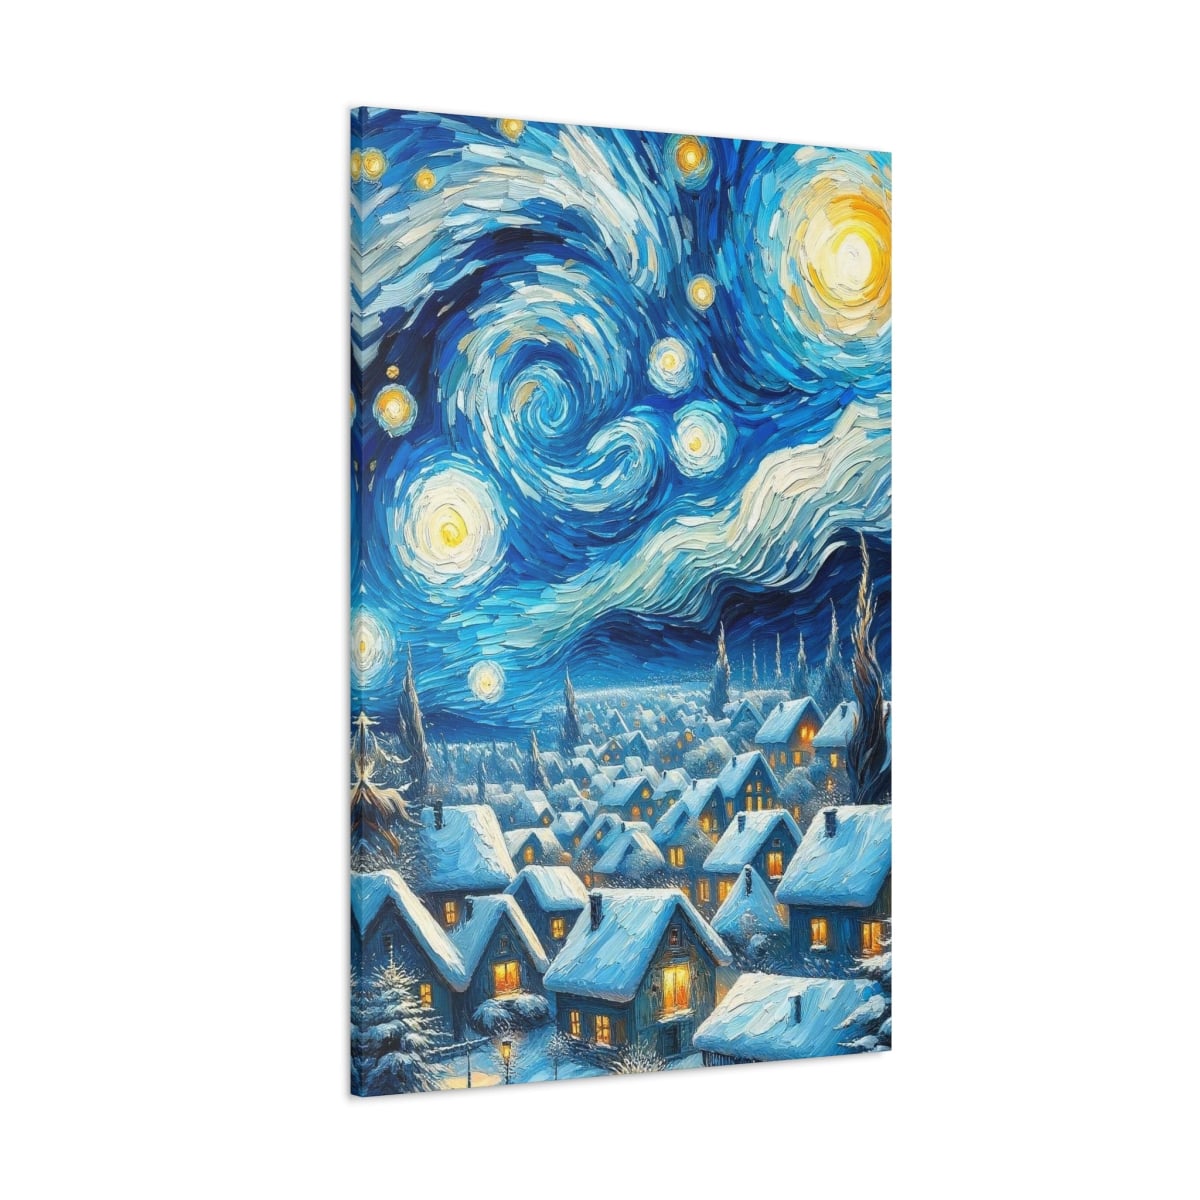 The Starry Night White Christmas by Van Gogh Gallery Wraps